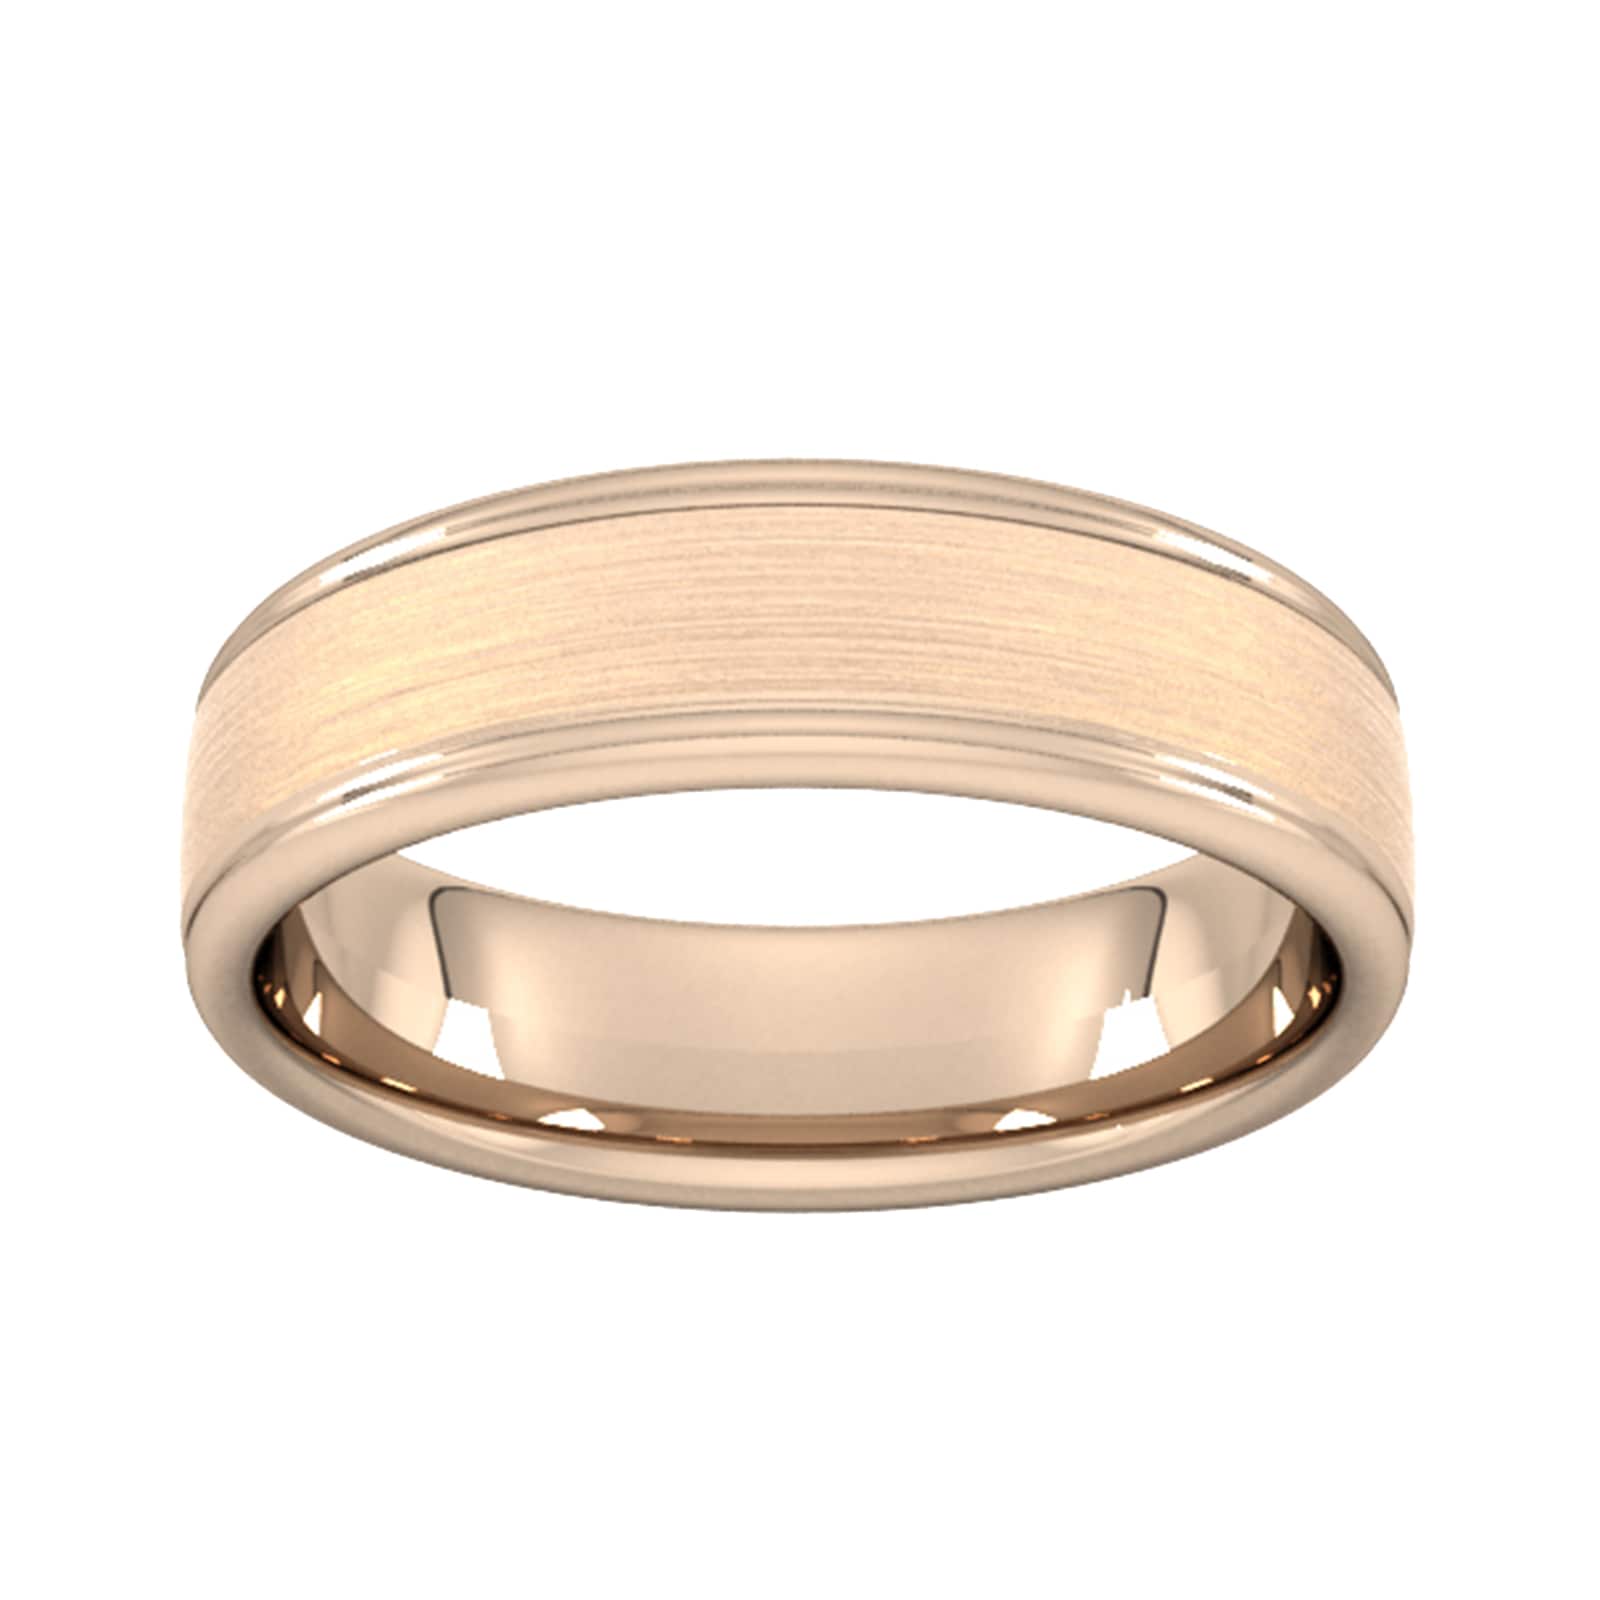 6mm Traditional Court Heavy Matt Centre With Grooves Wedding Ring In 9 Carat Rose Gold - Ring Size V